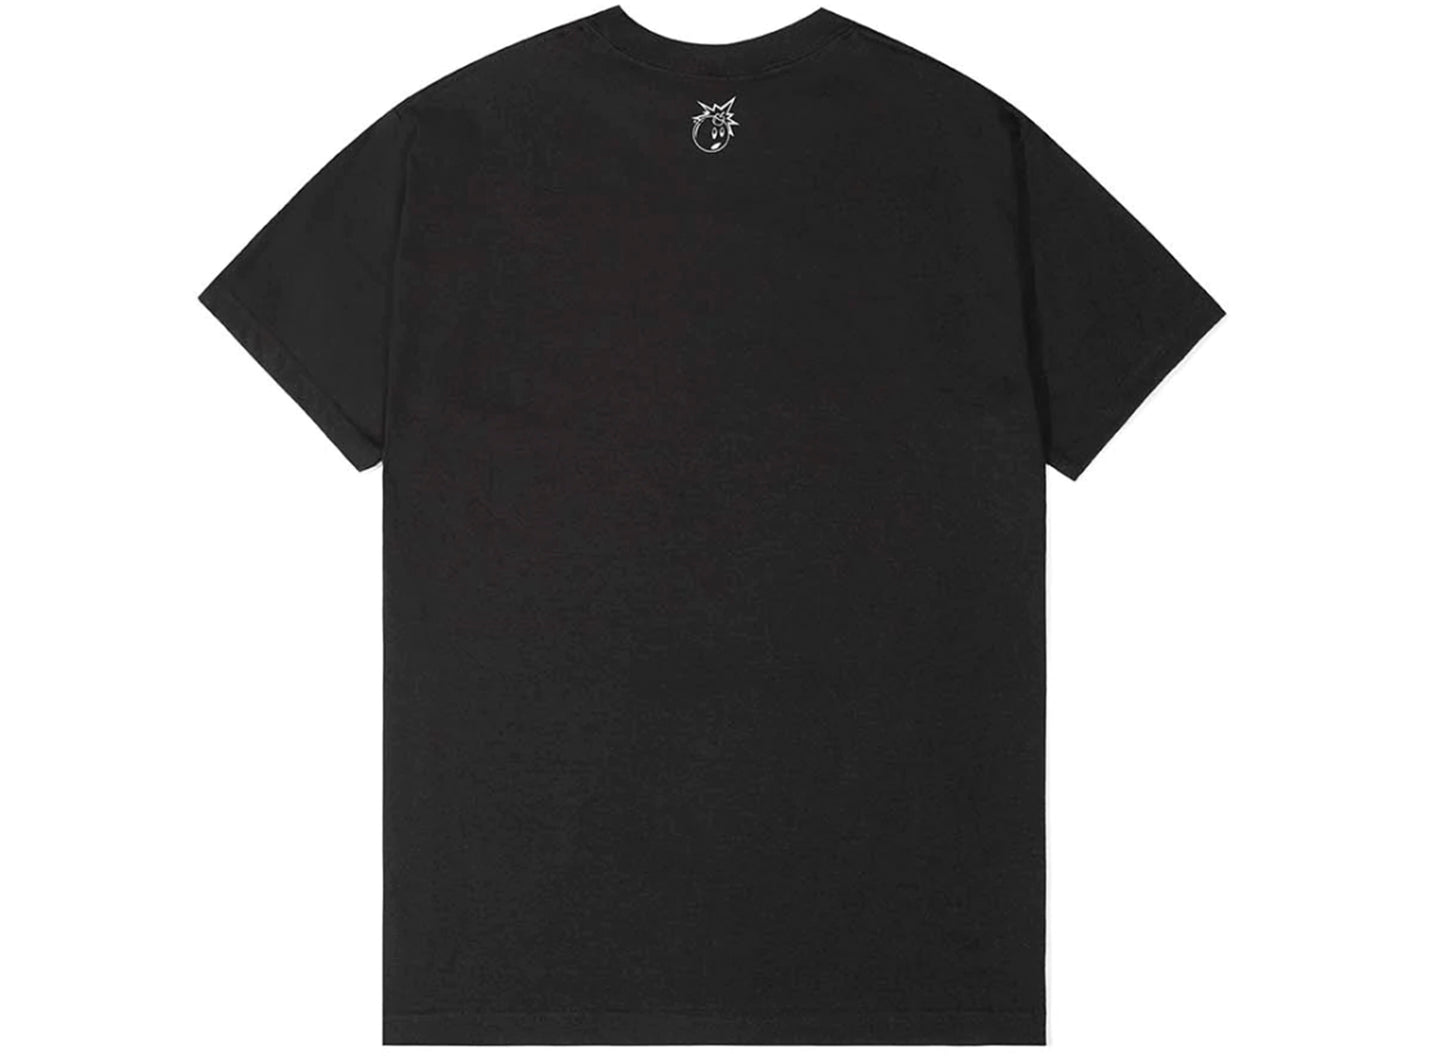 The Hundreds NFT's Are Dead Tee